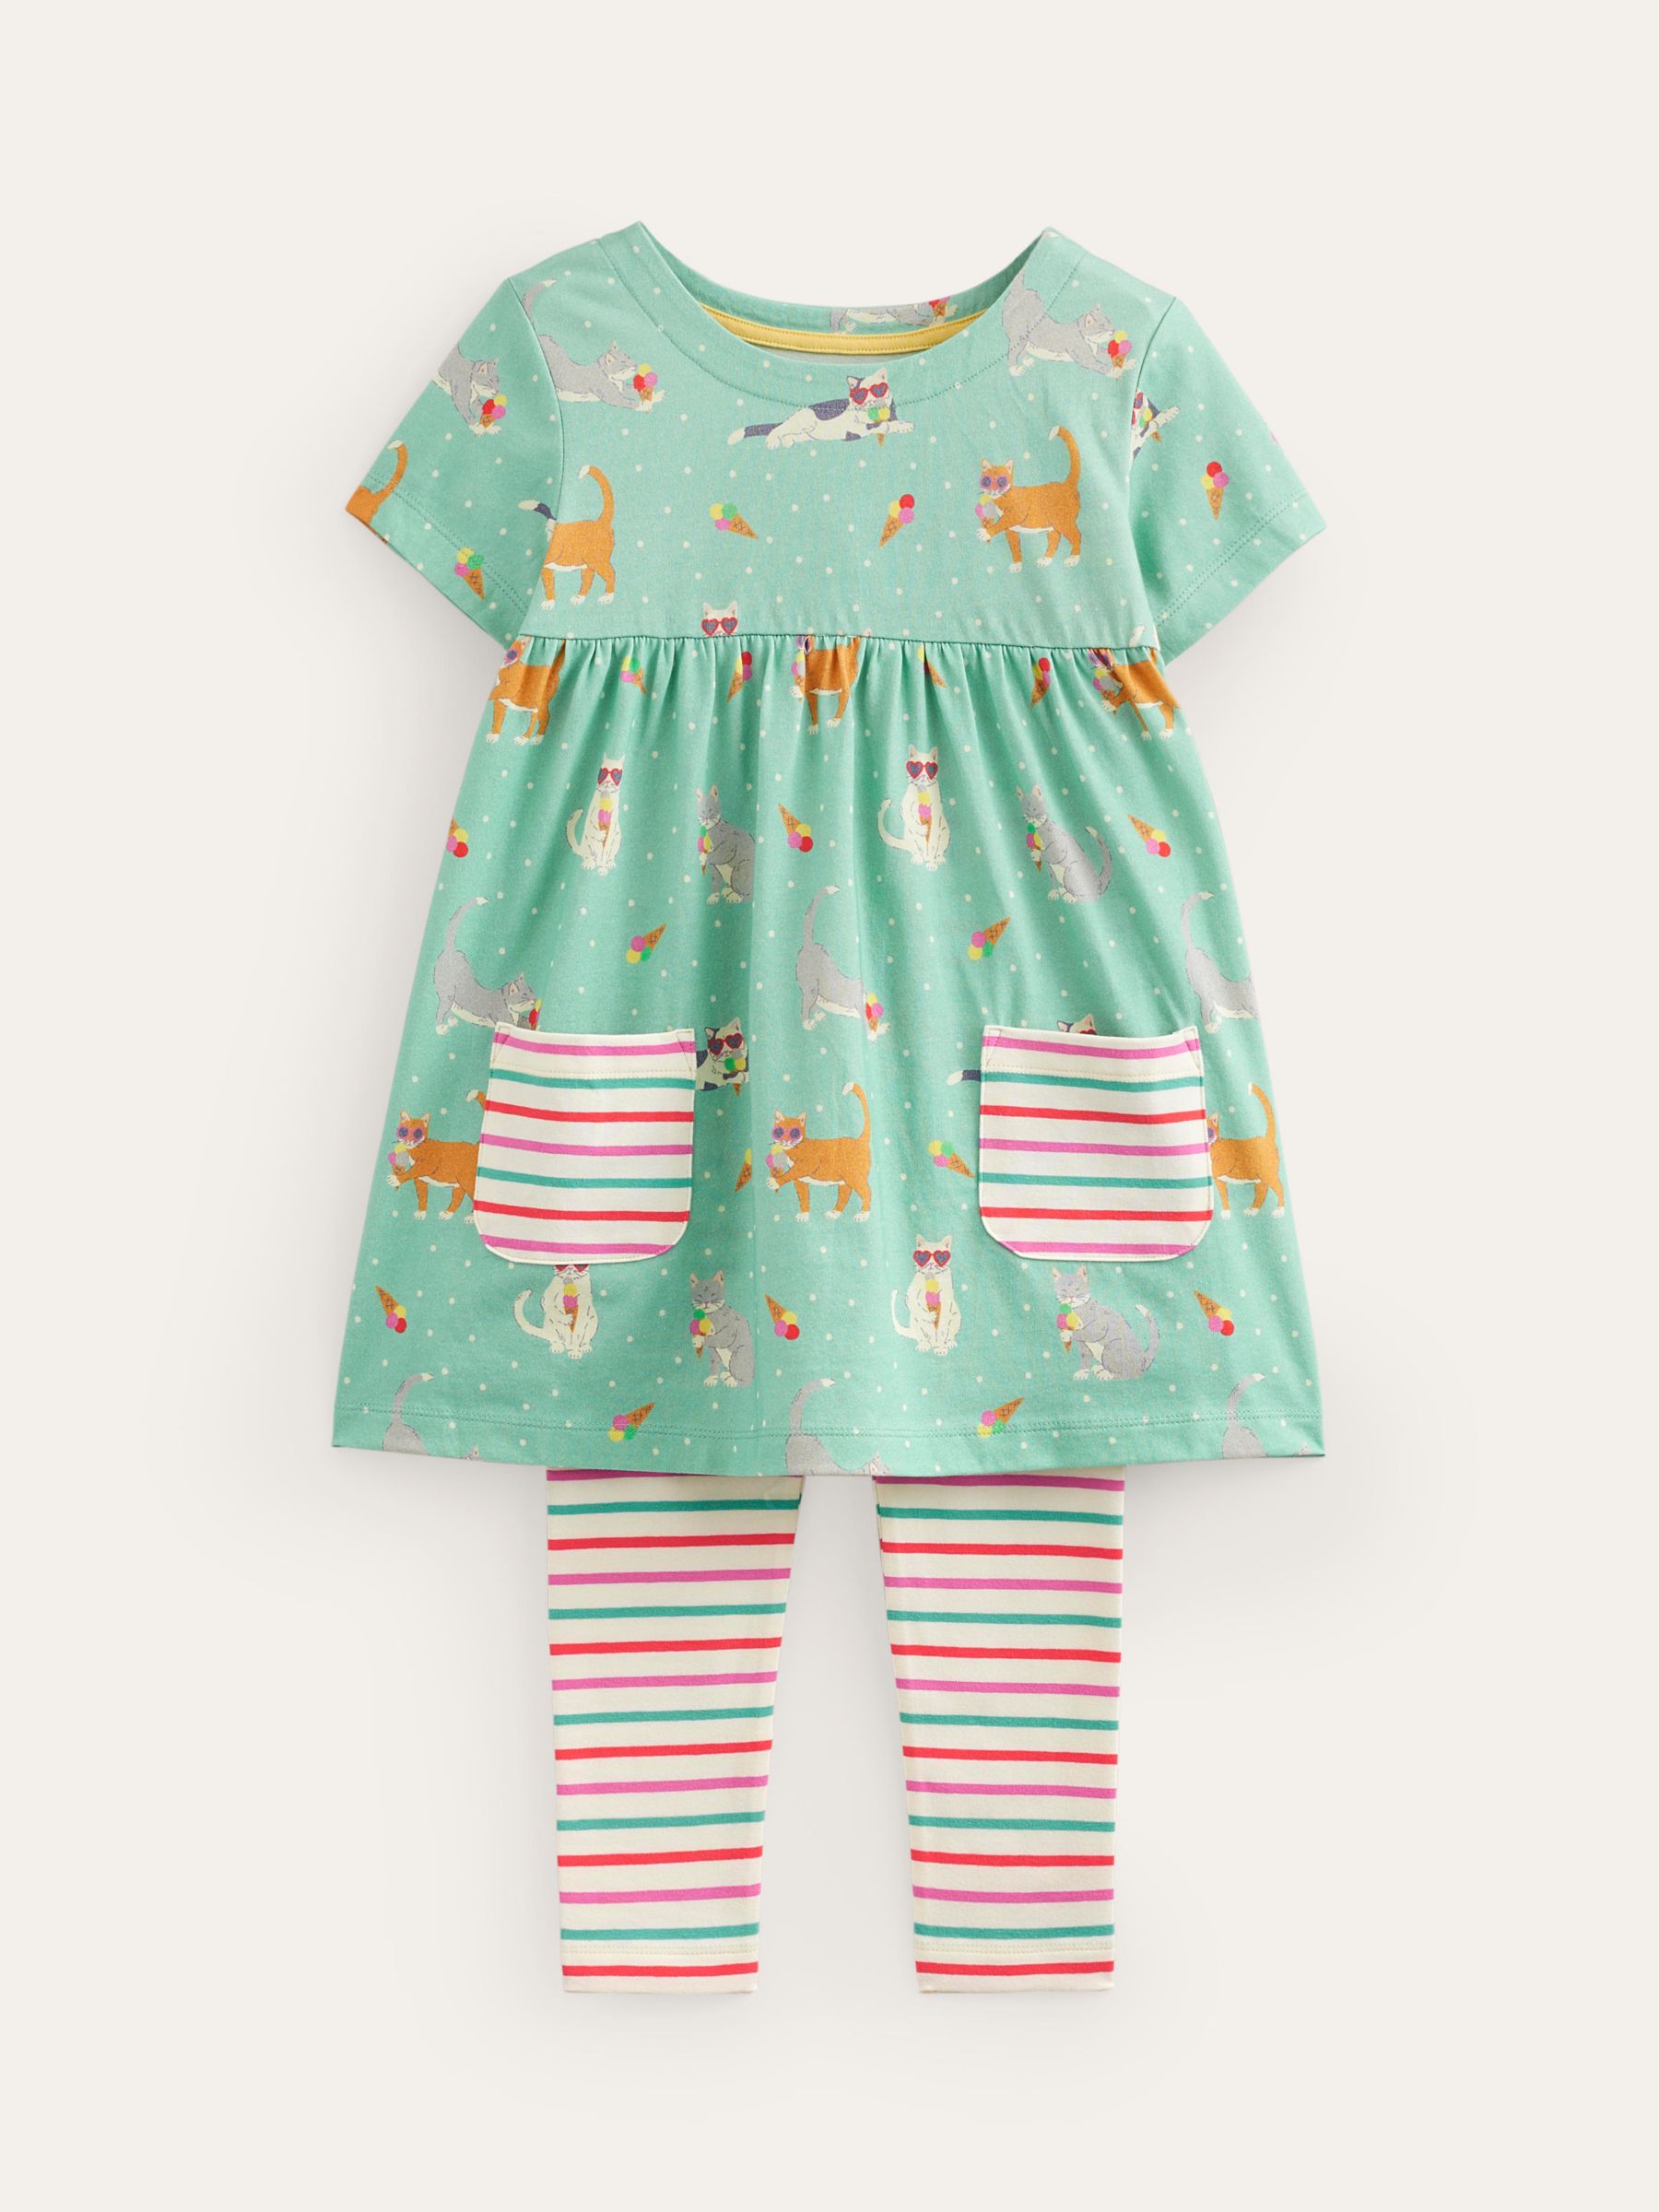 Mini Boden Kids' Cats Tunic and Leggings Set, Blue Holiday, 12-18 months